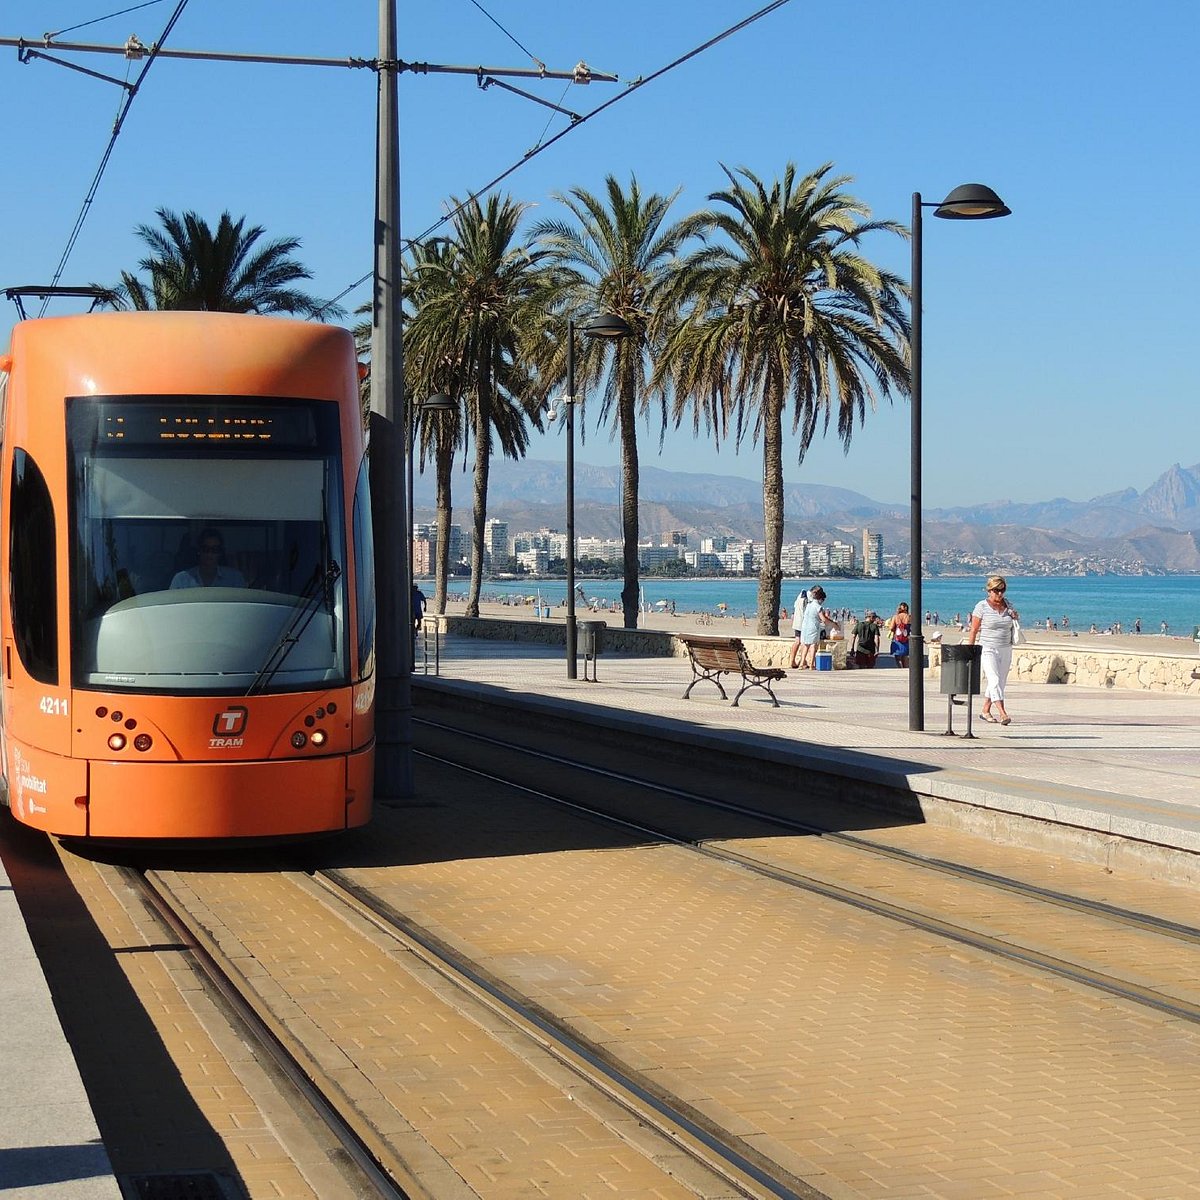 Exploring Transportation Options in Alicante and Free Travel Opportunities for Eligible Groups